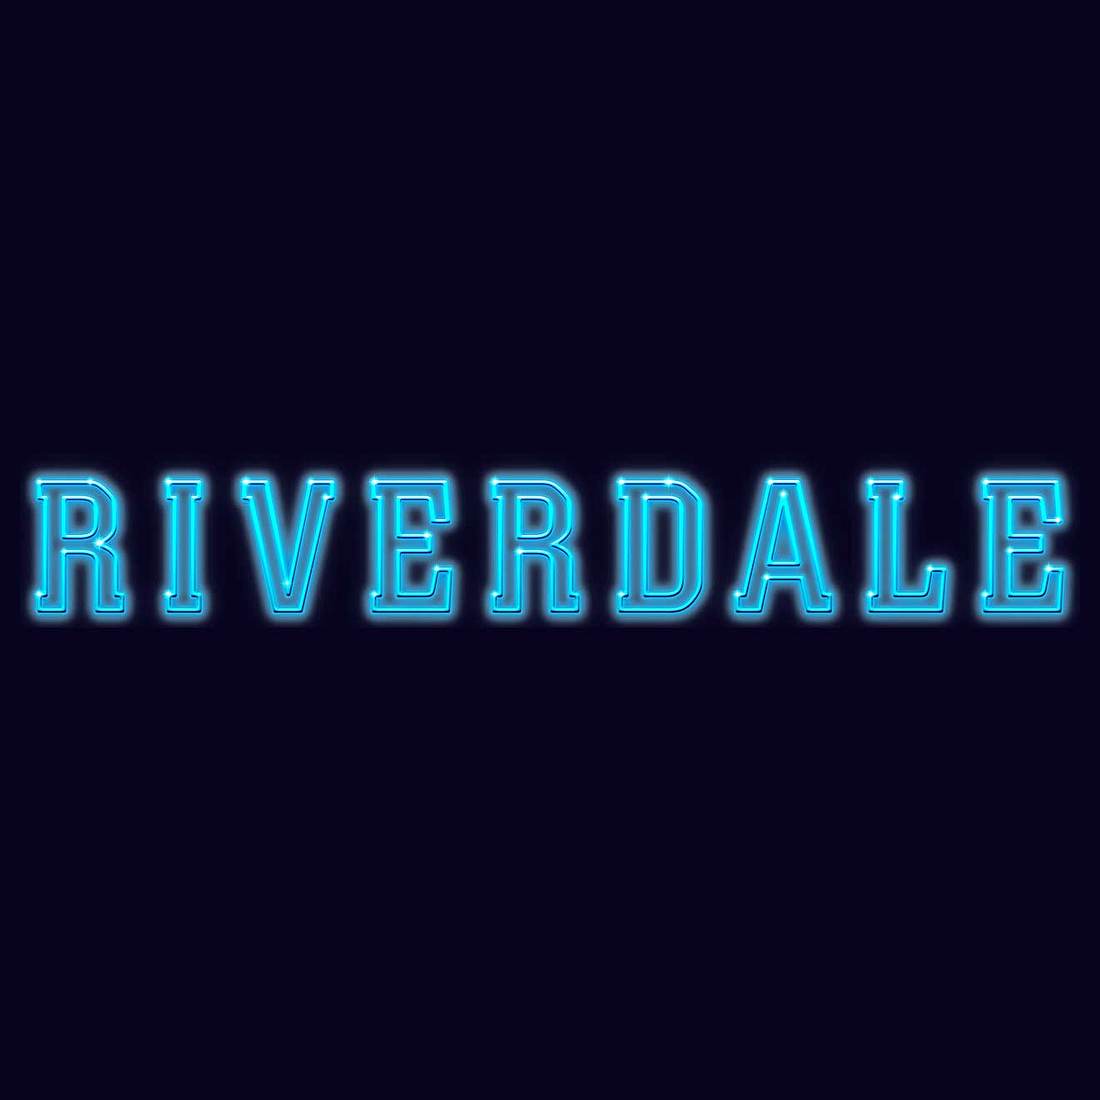 Riverdale Spin-Off: Neue Serie in Planung?